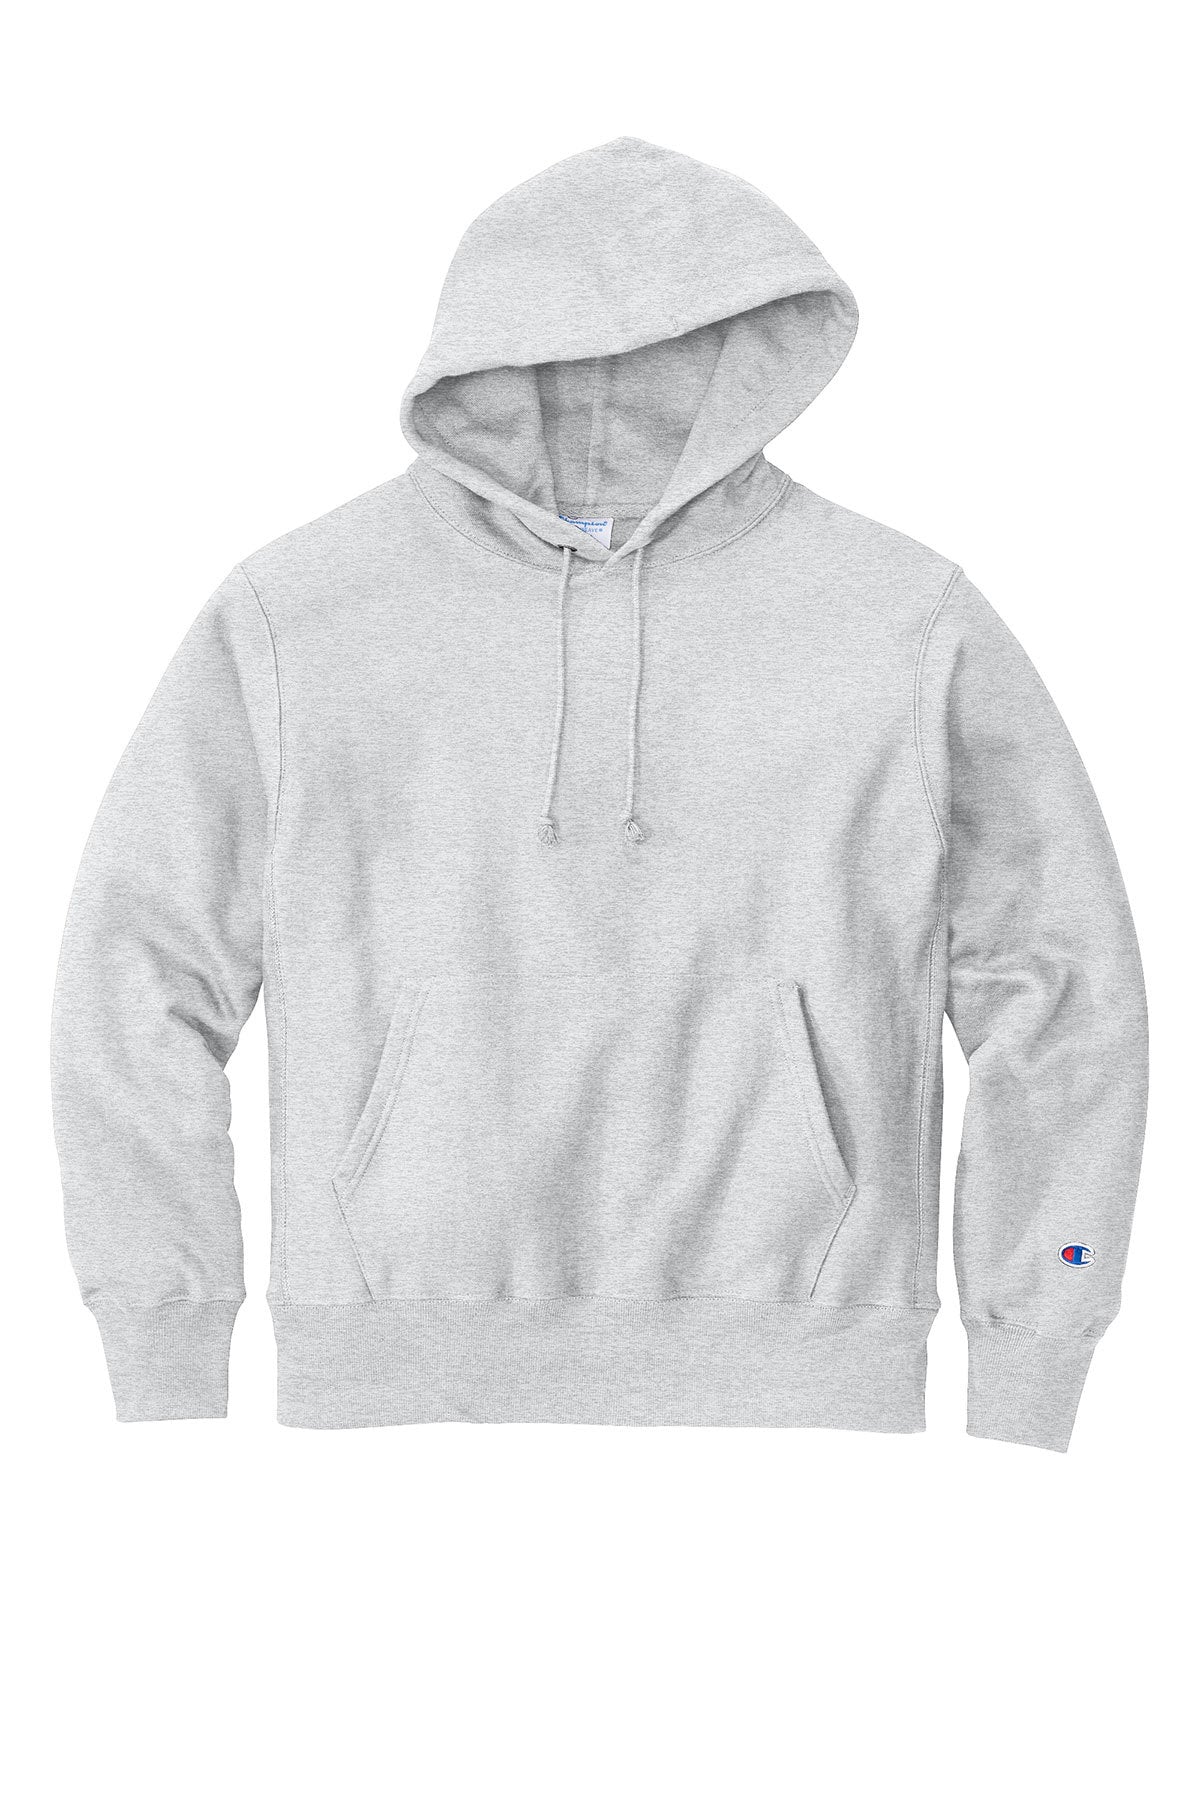 1897 Active Diamond Weave Hoodie for Men in Oatmeal